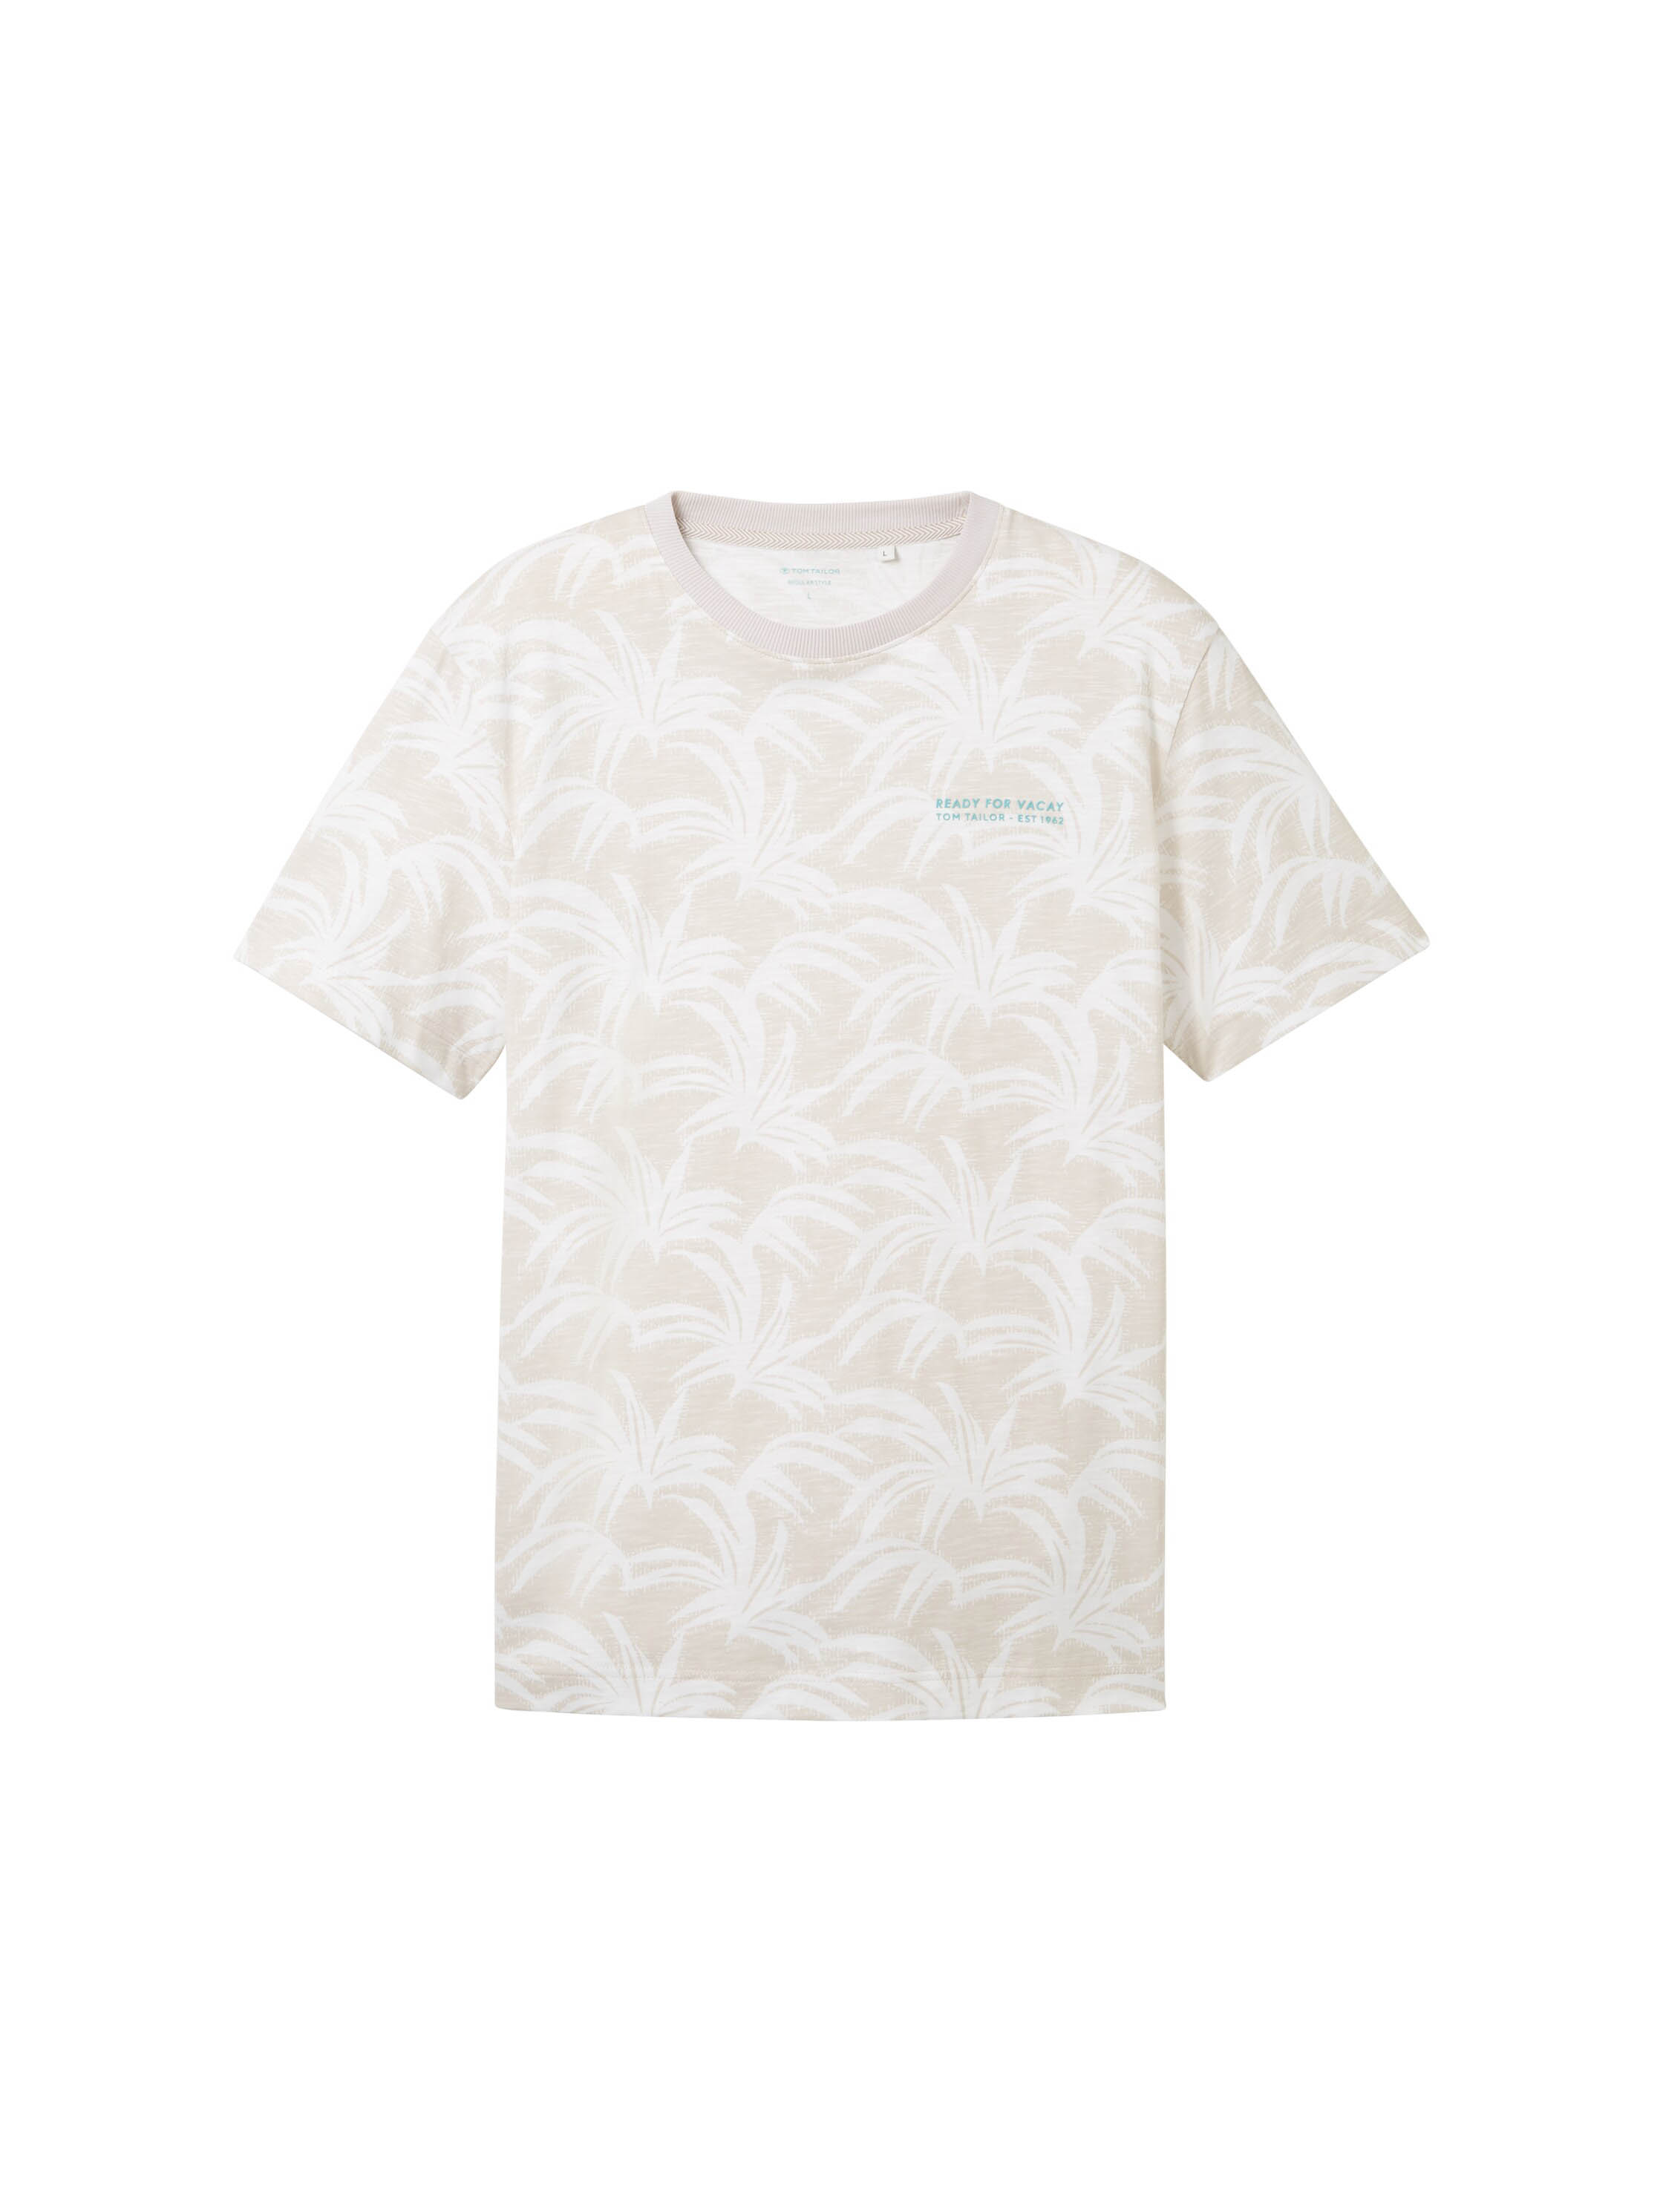 Tom tailor Allover Printed T-shirt